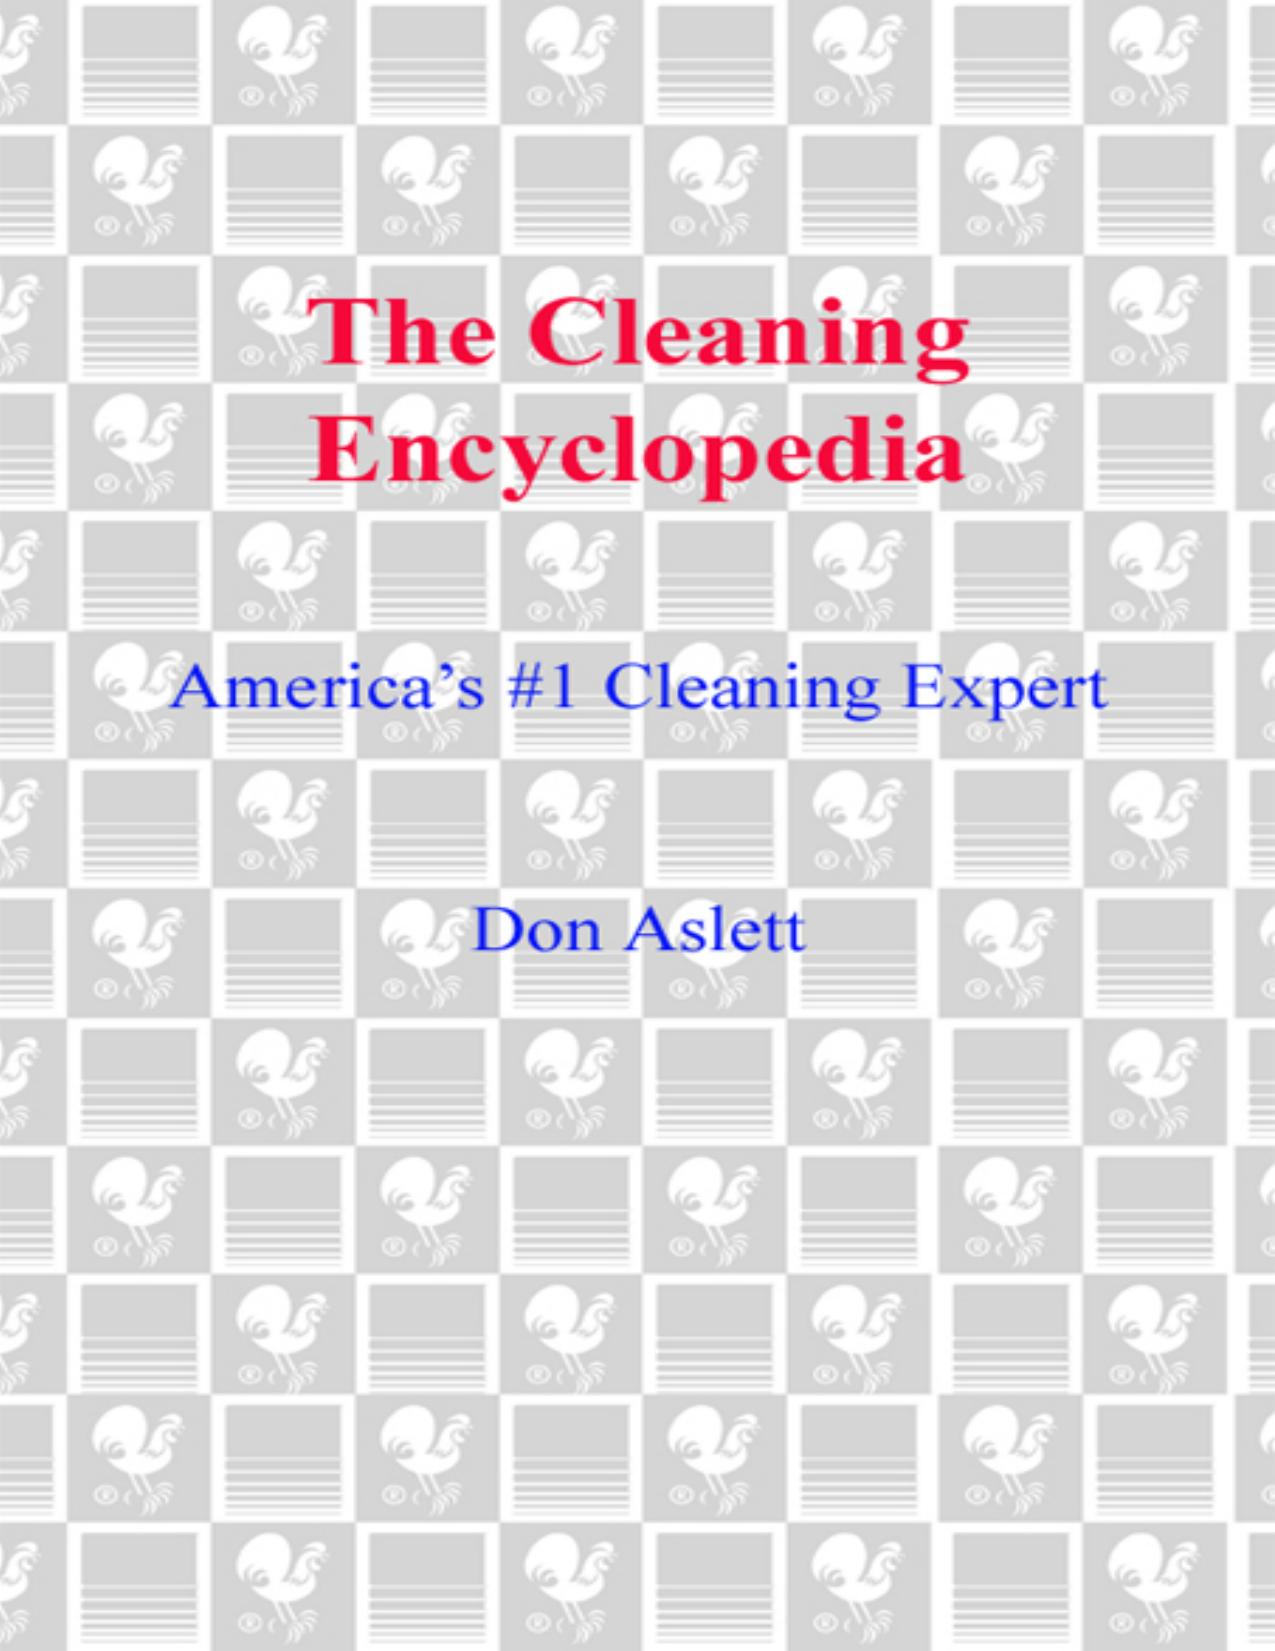 The Cleaning Encyclopedia by Don Aslett